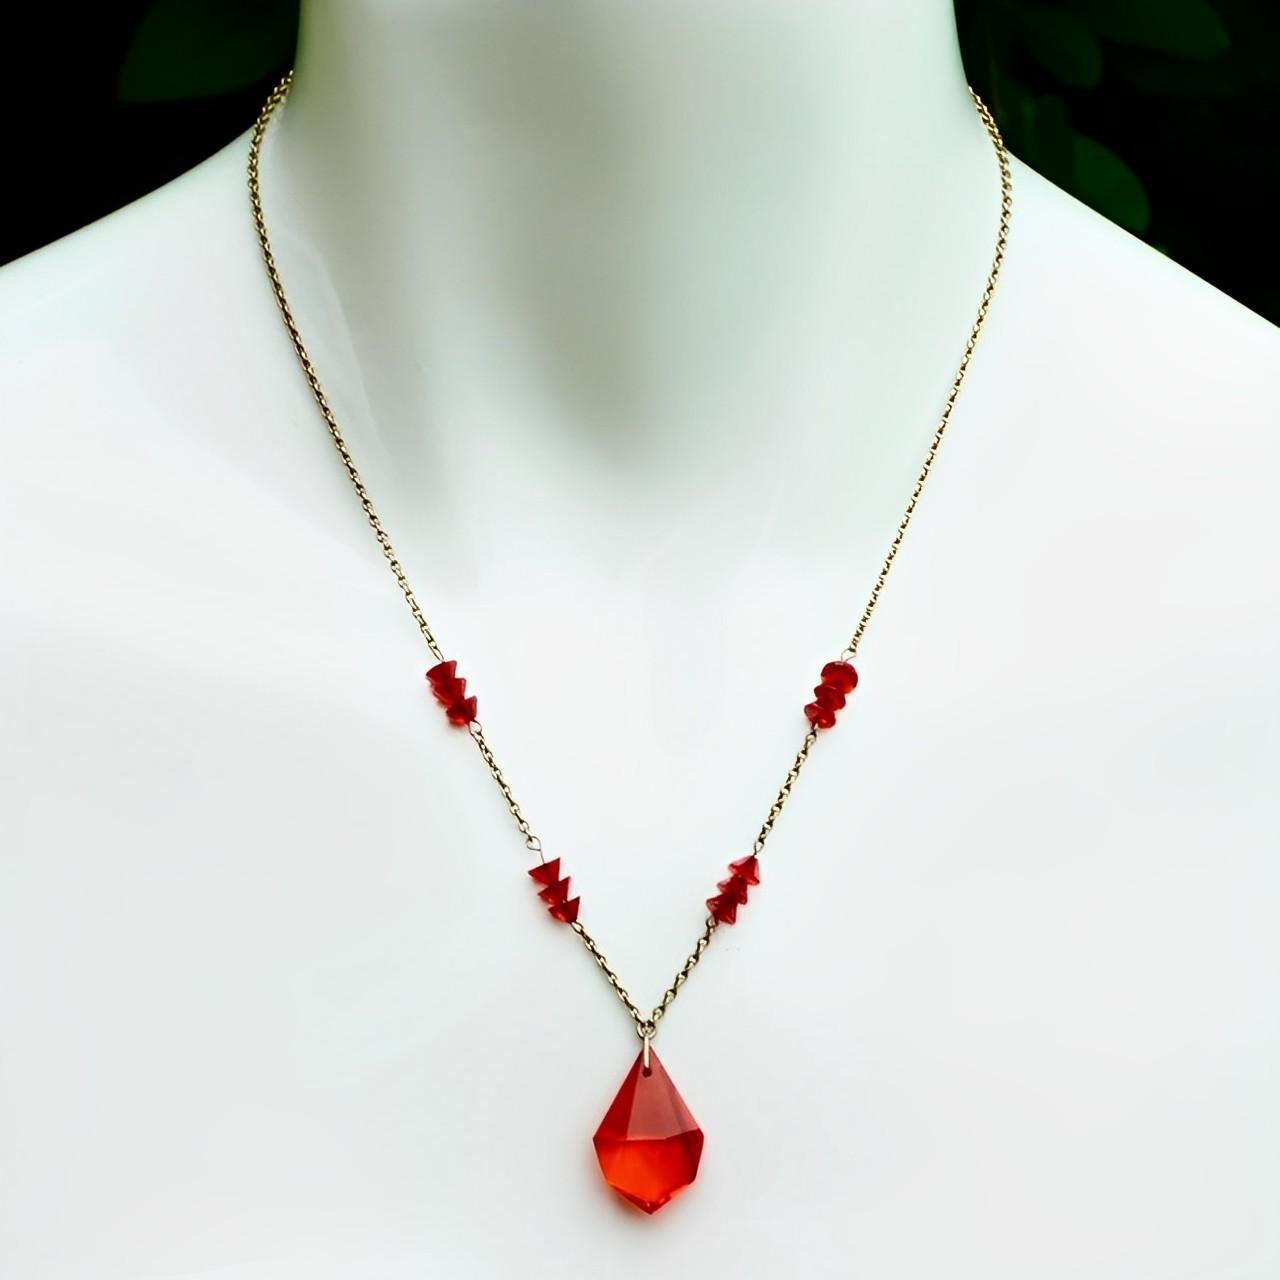 Art Deco Silver Tone Drop Pendant Necklace with Red Glass Crystals In Good Condition For Sale In London, GB